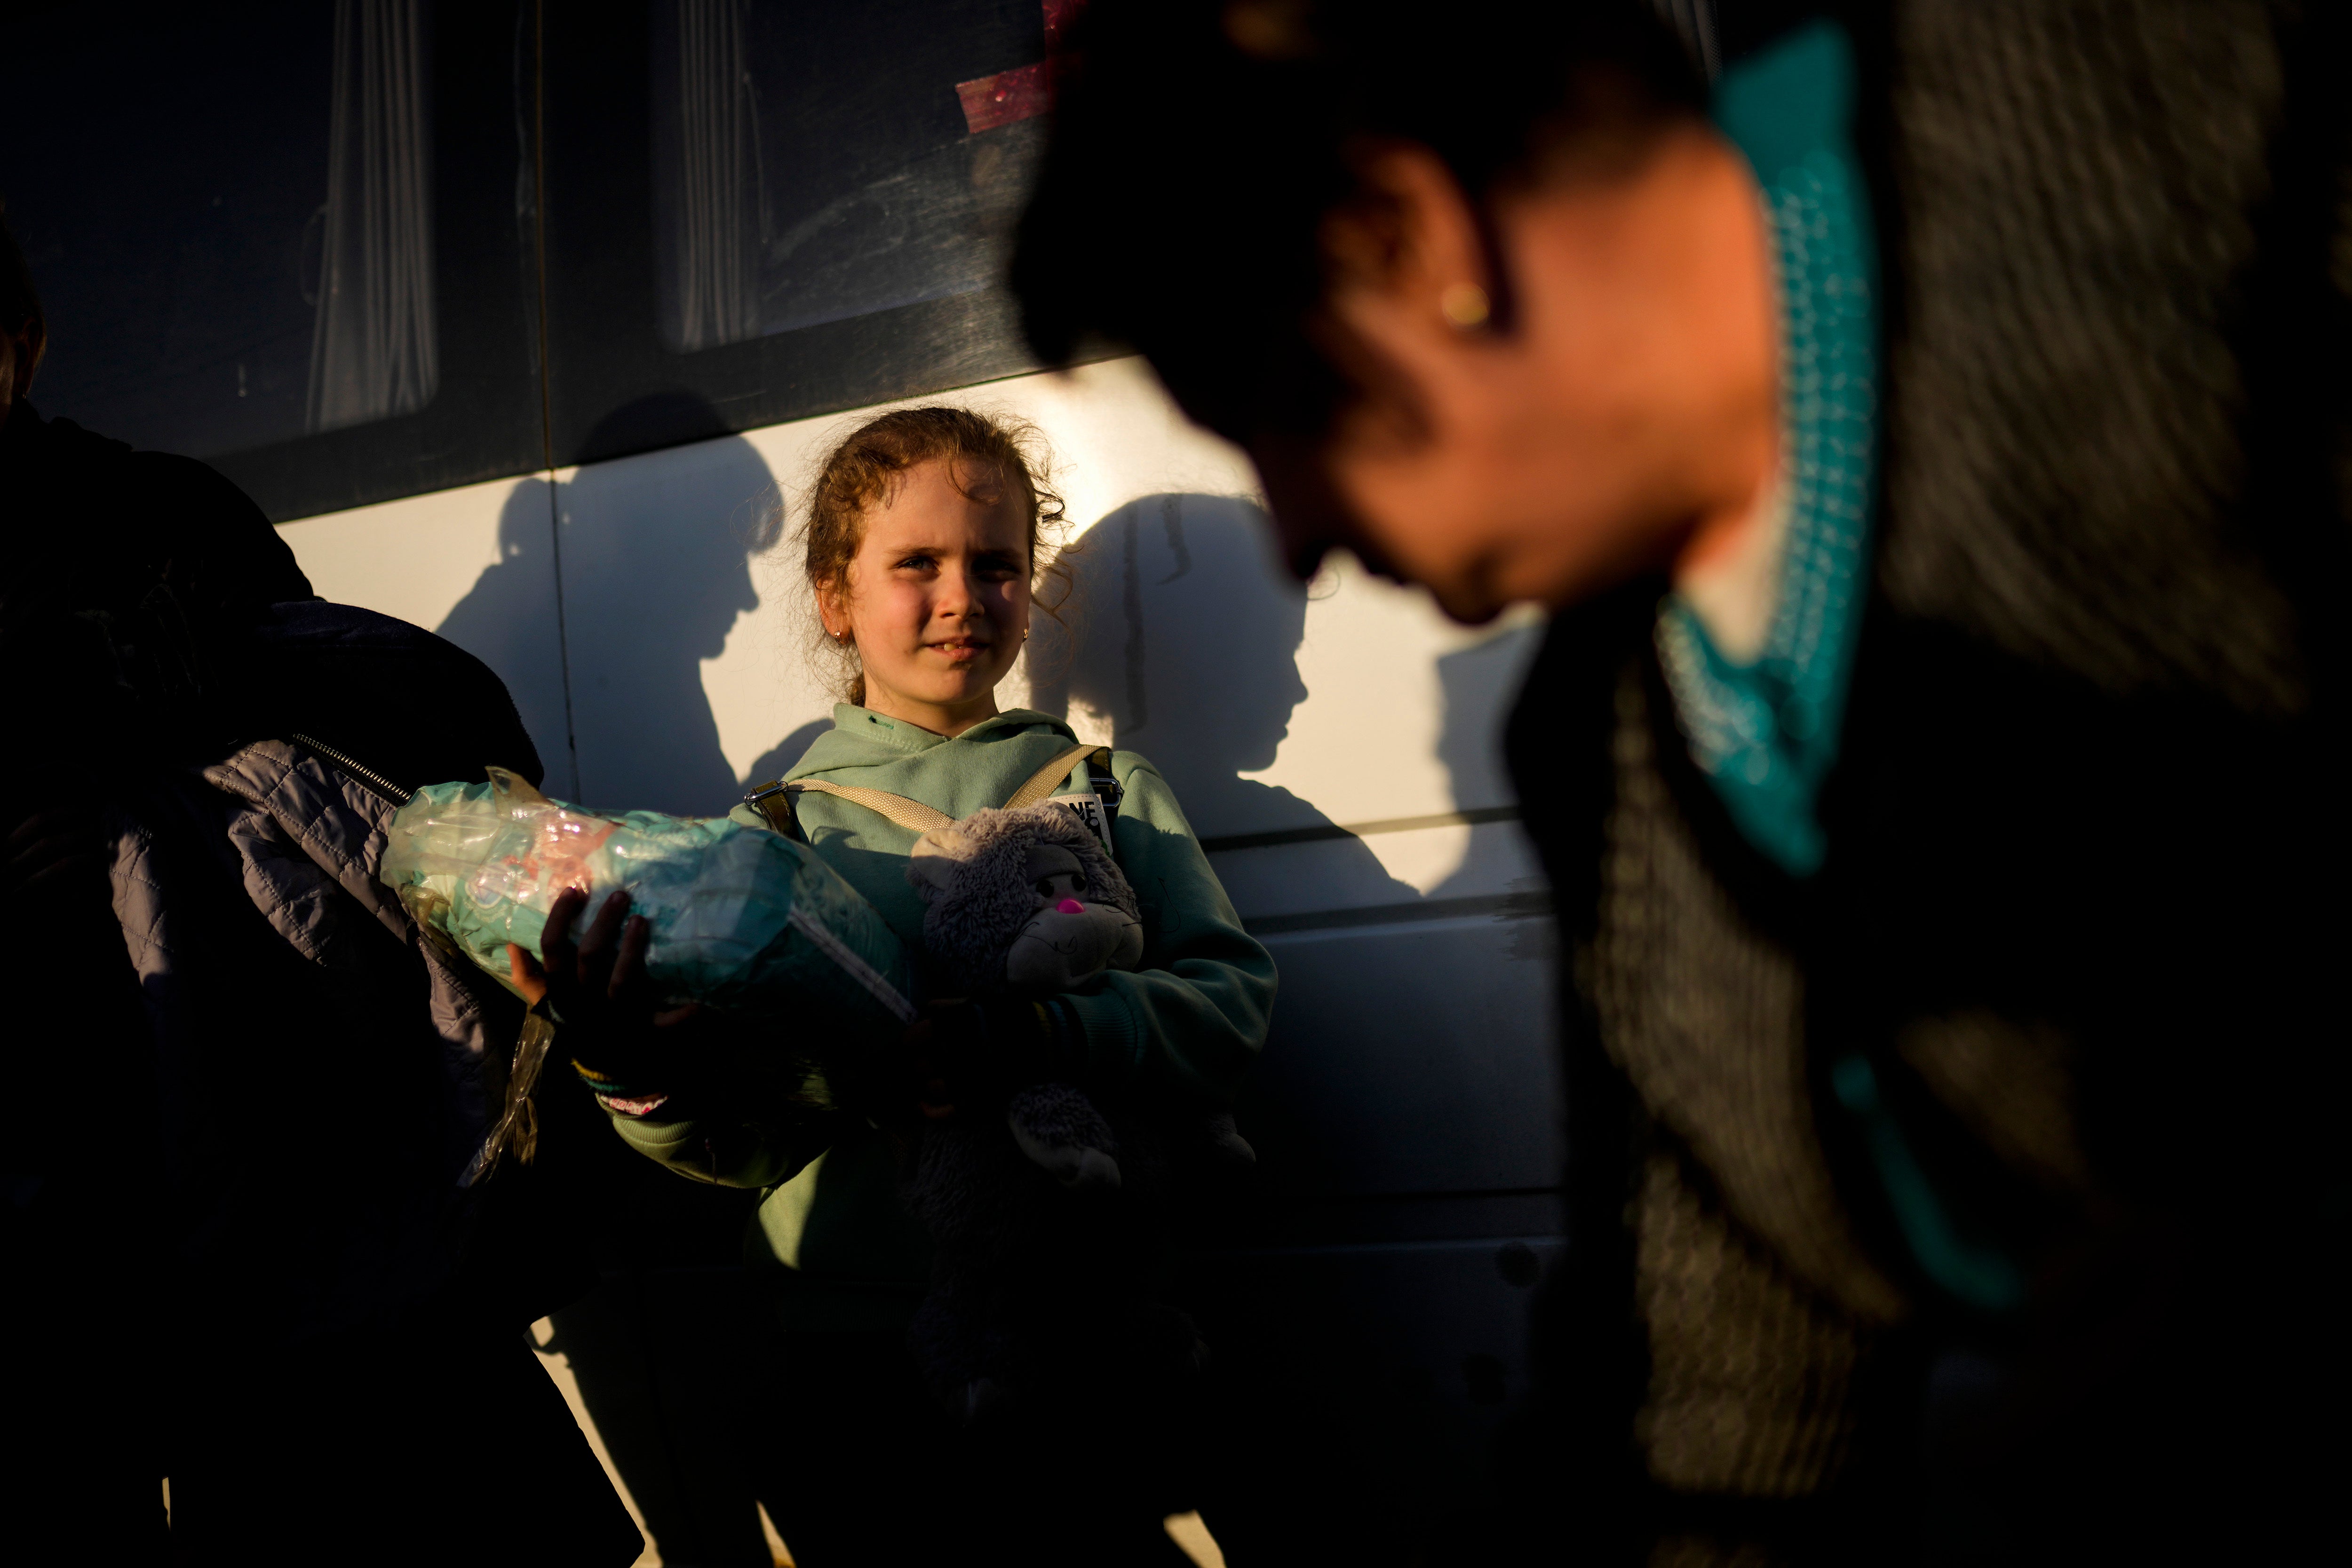 A child and her family who fled from Mariupol arrive to a reception center for displaced people in Zaporizhzhia, Ukraine